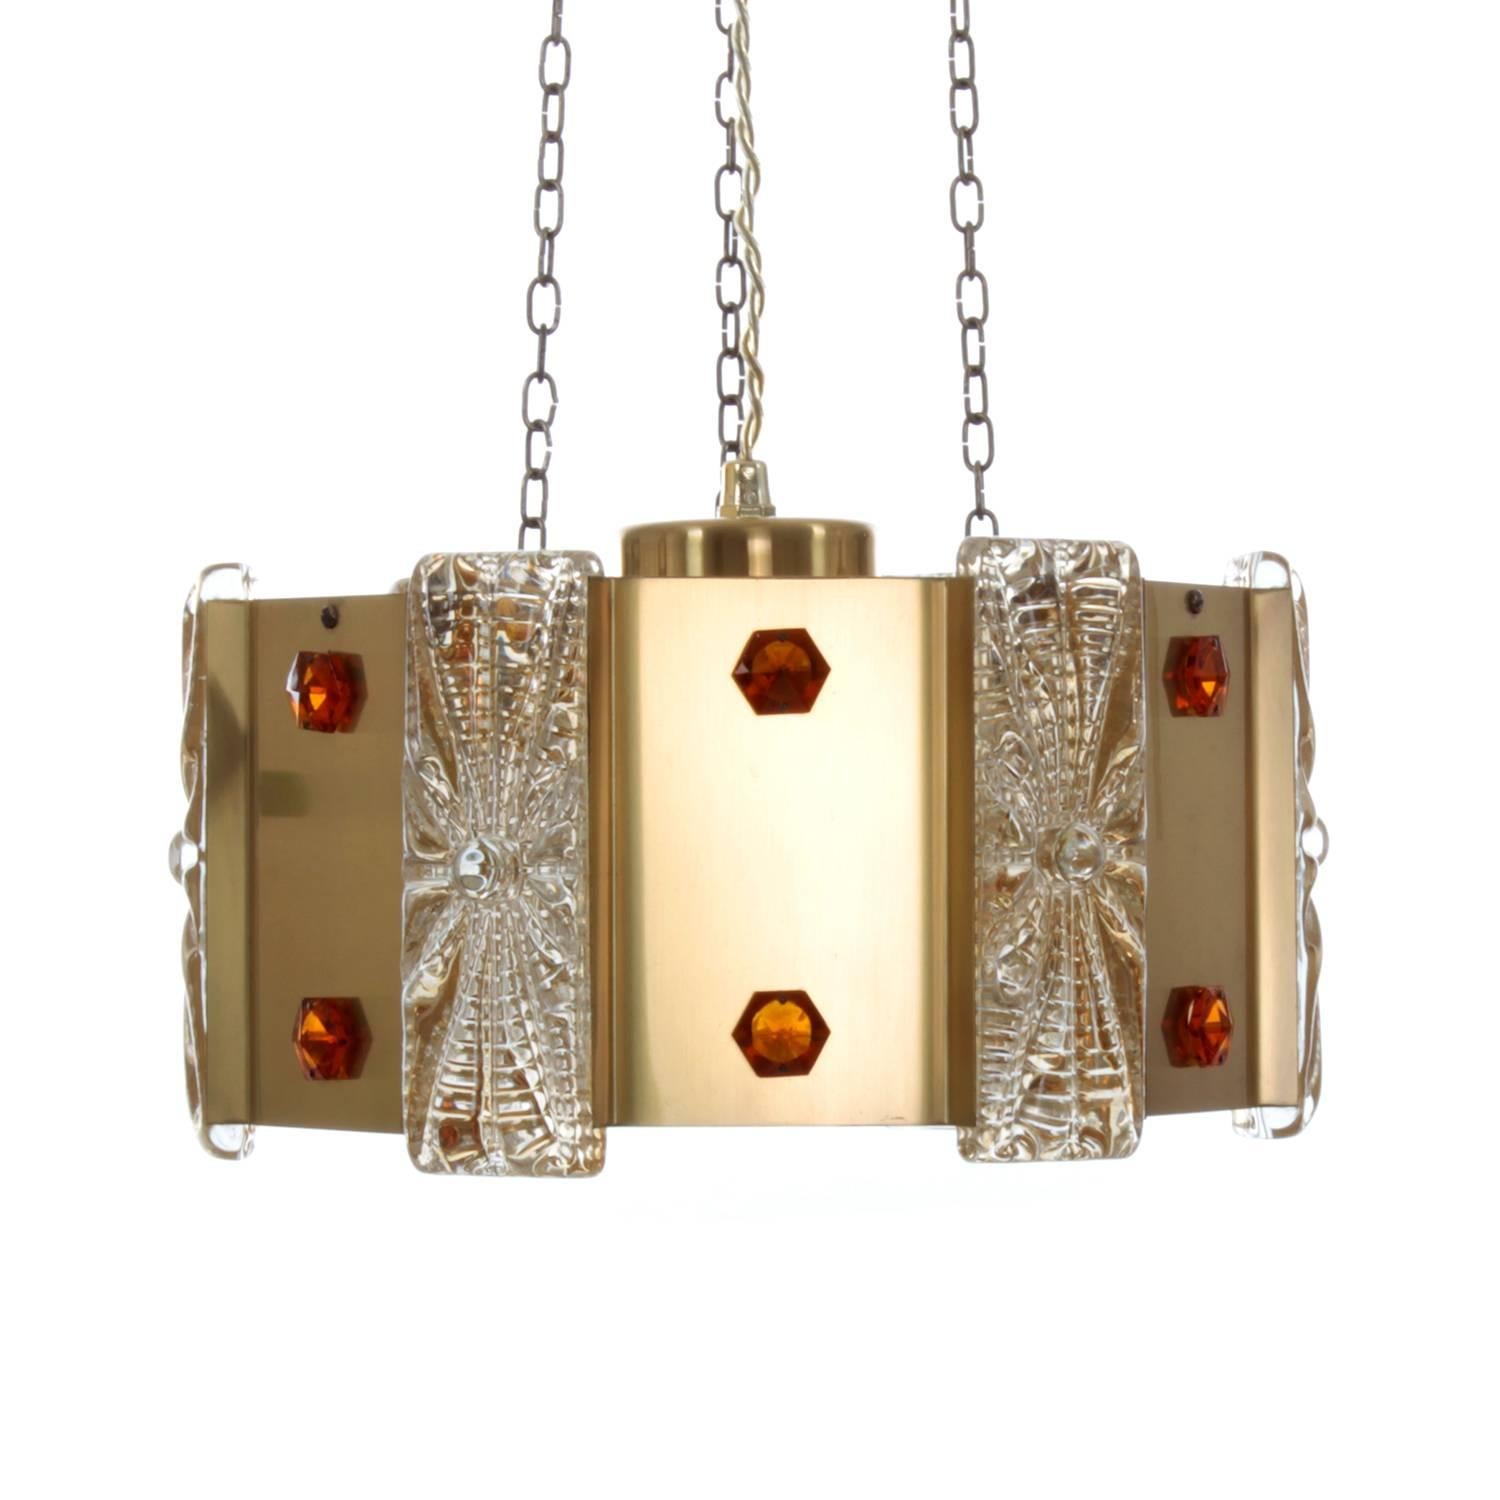 Prism Pendant by Vitrika, 1970s Brass Ceiling Light with Pressed Glass For Sale